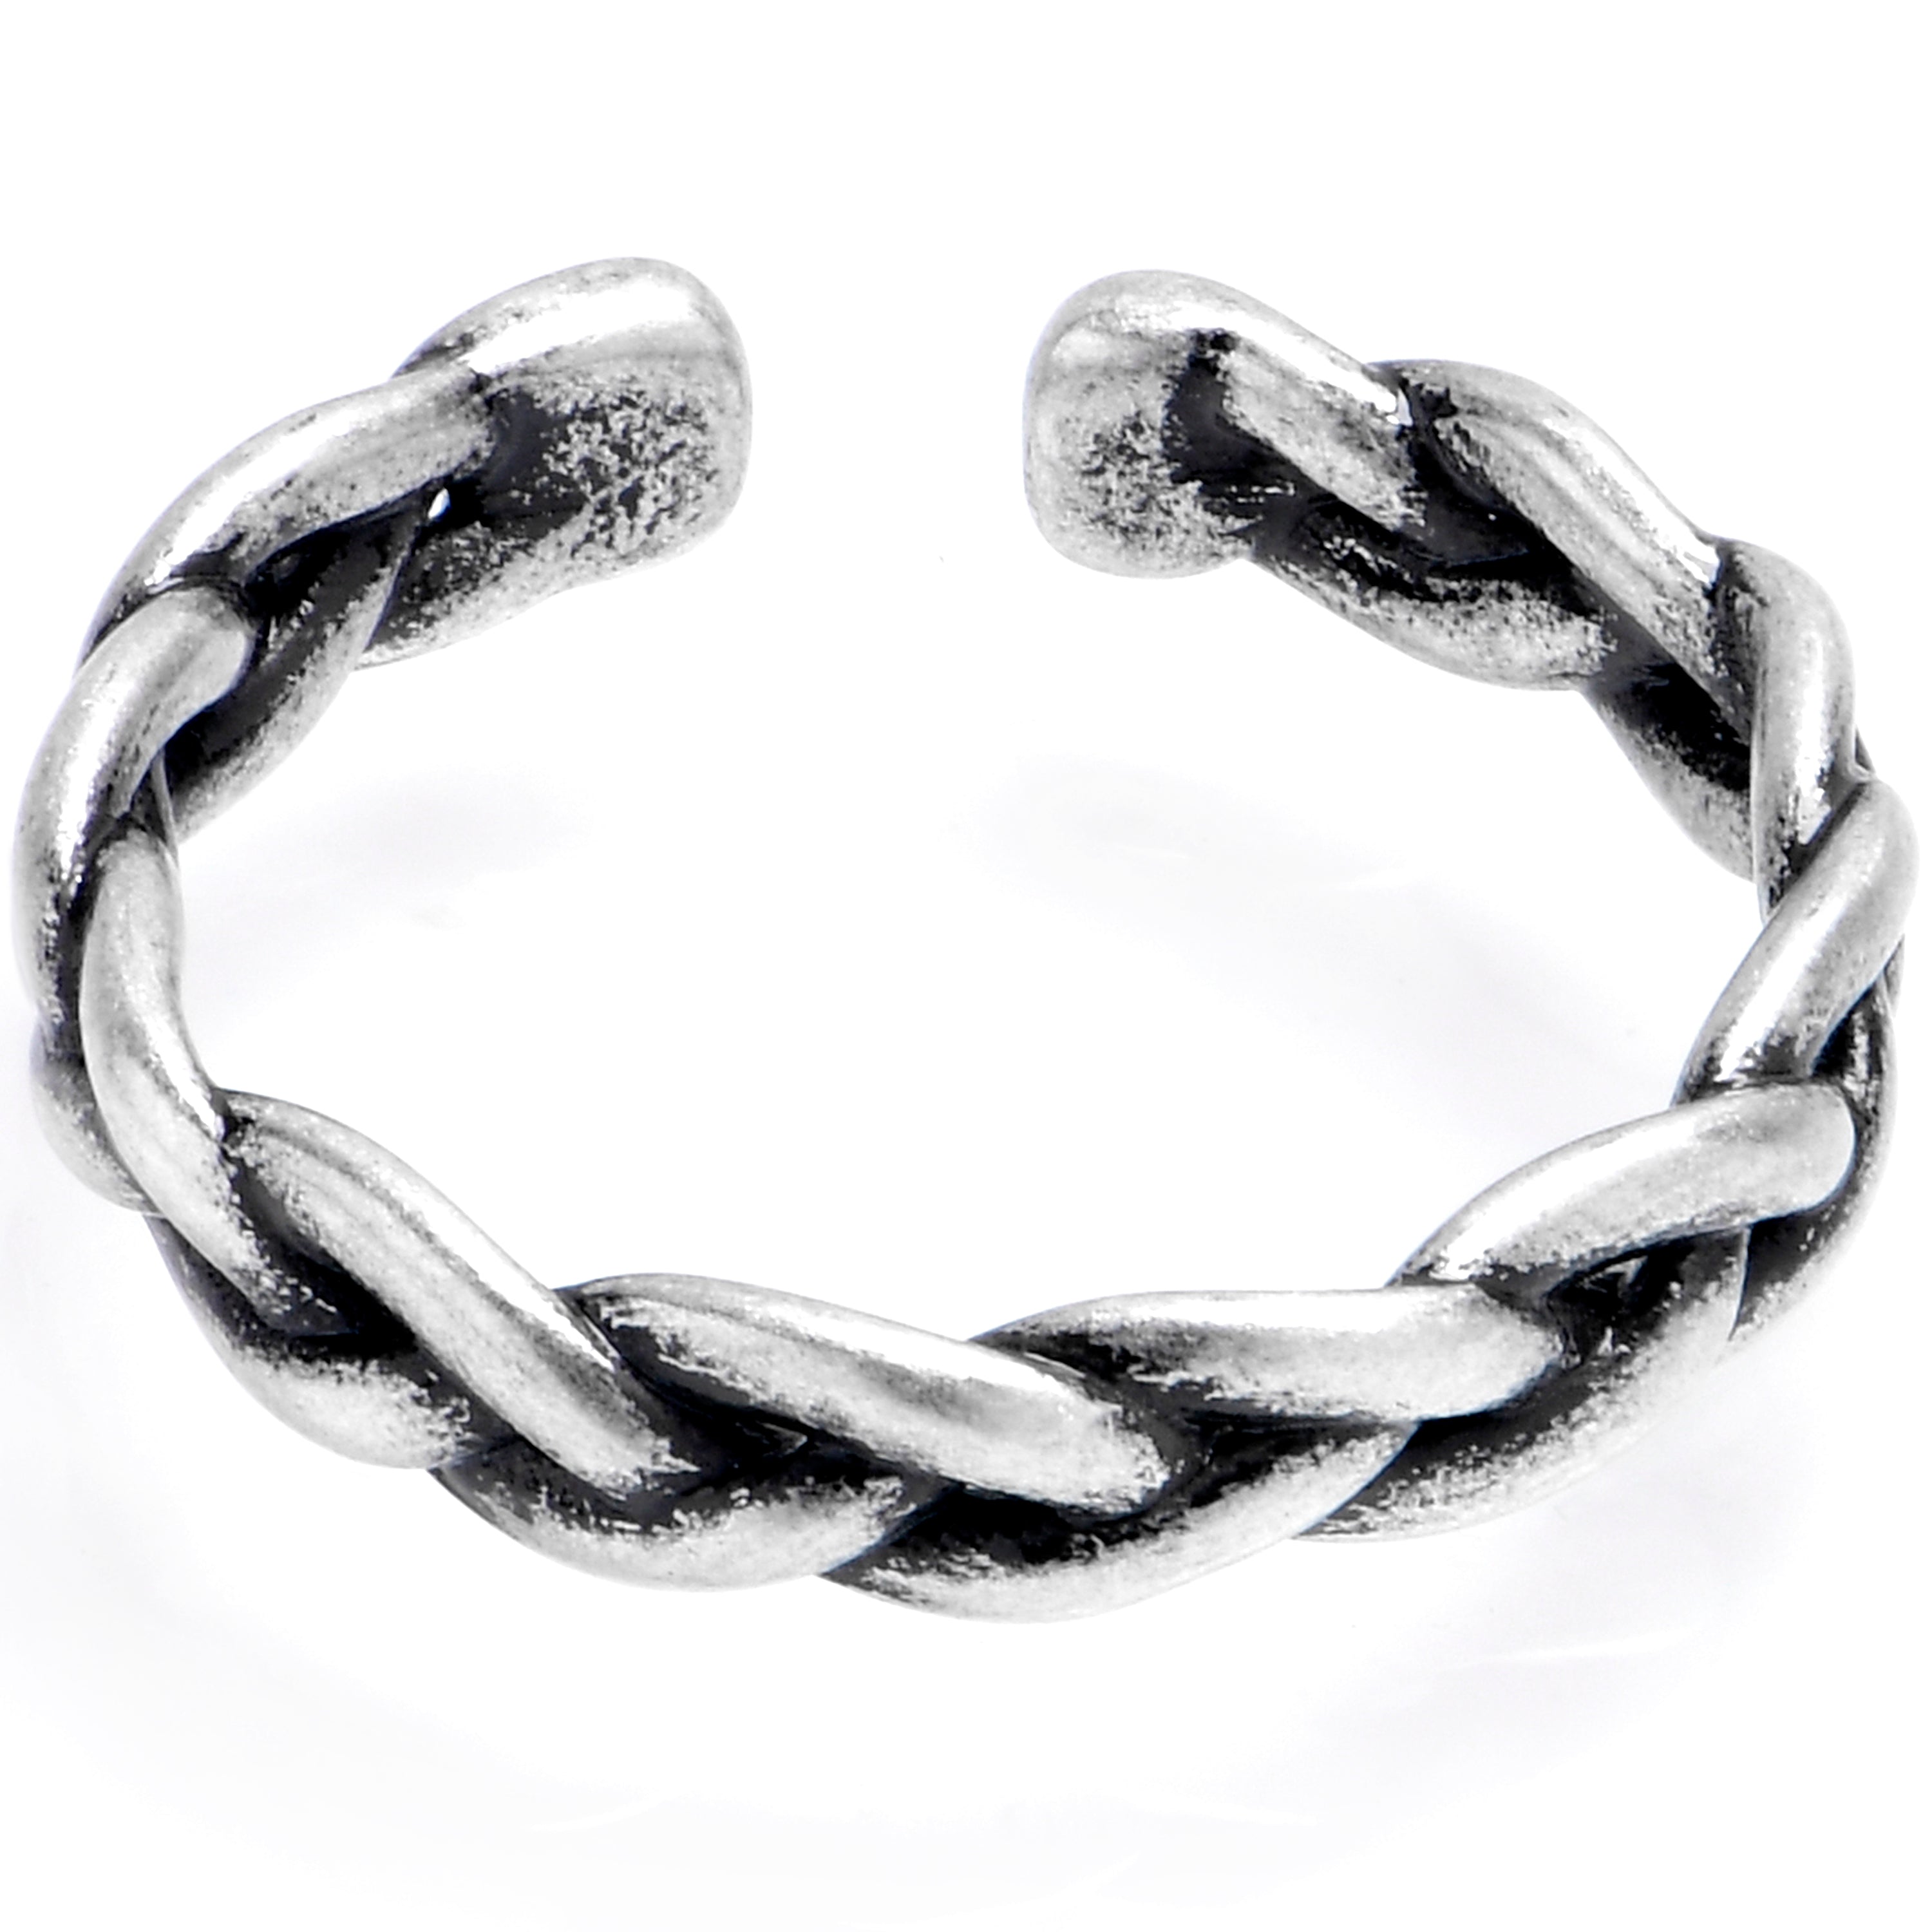 Nifty Knotted Style Adjustable Toe Ring